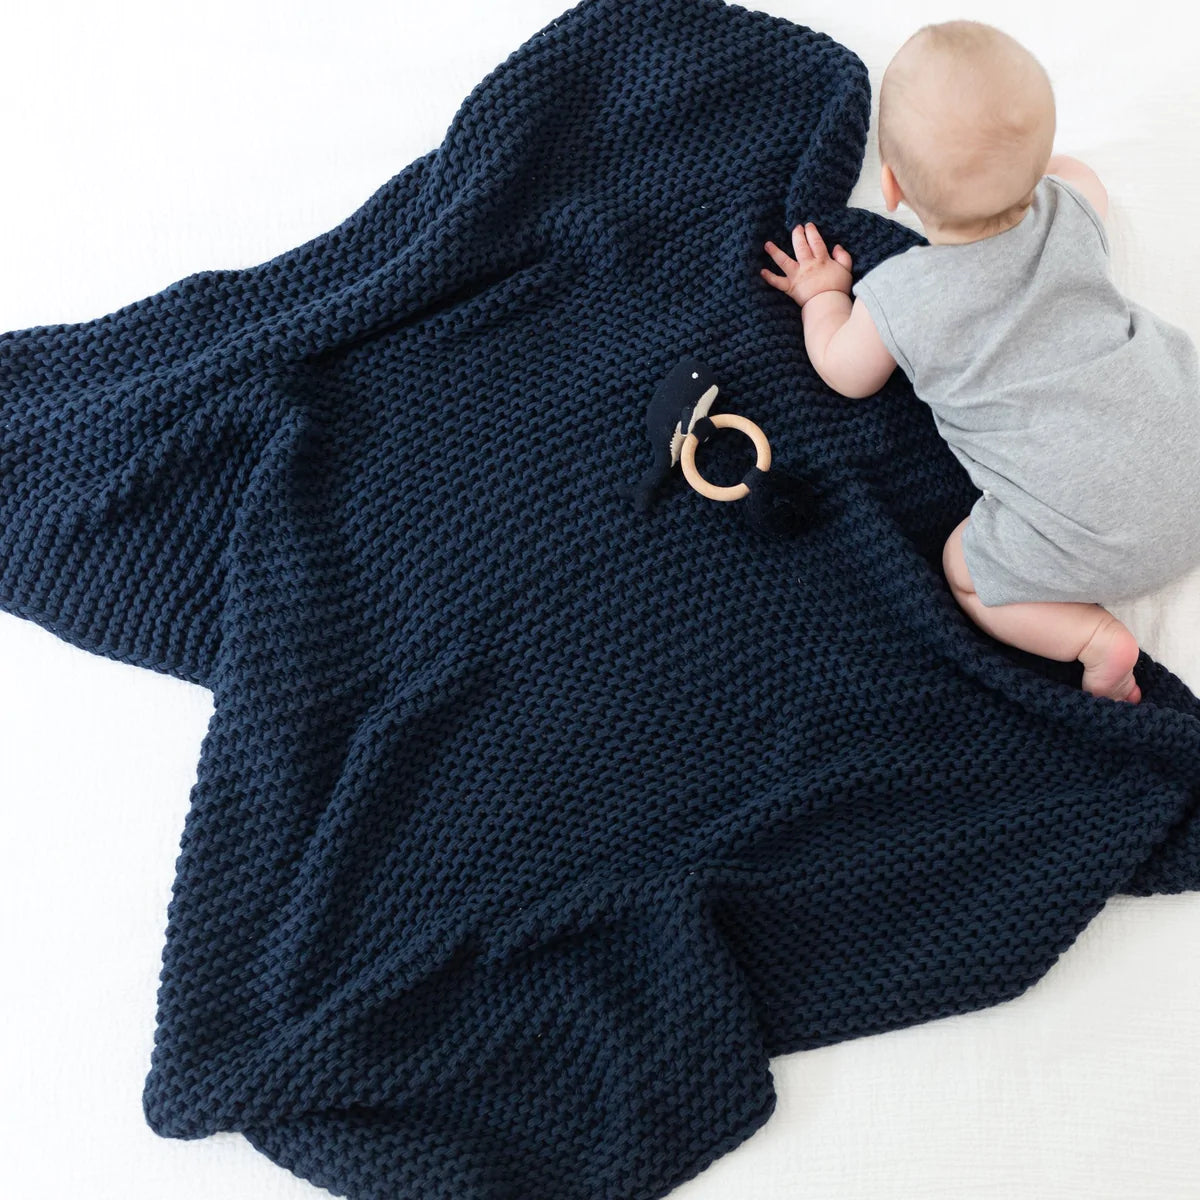 Organic Cotton Comfy Knit Baby Gift Set Navy